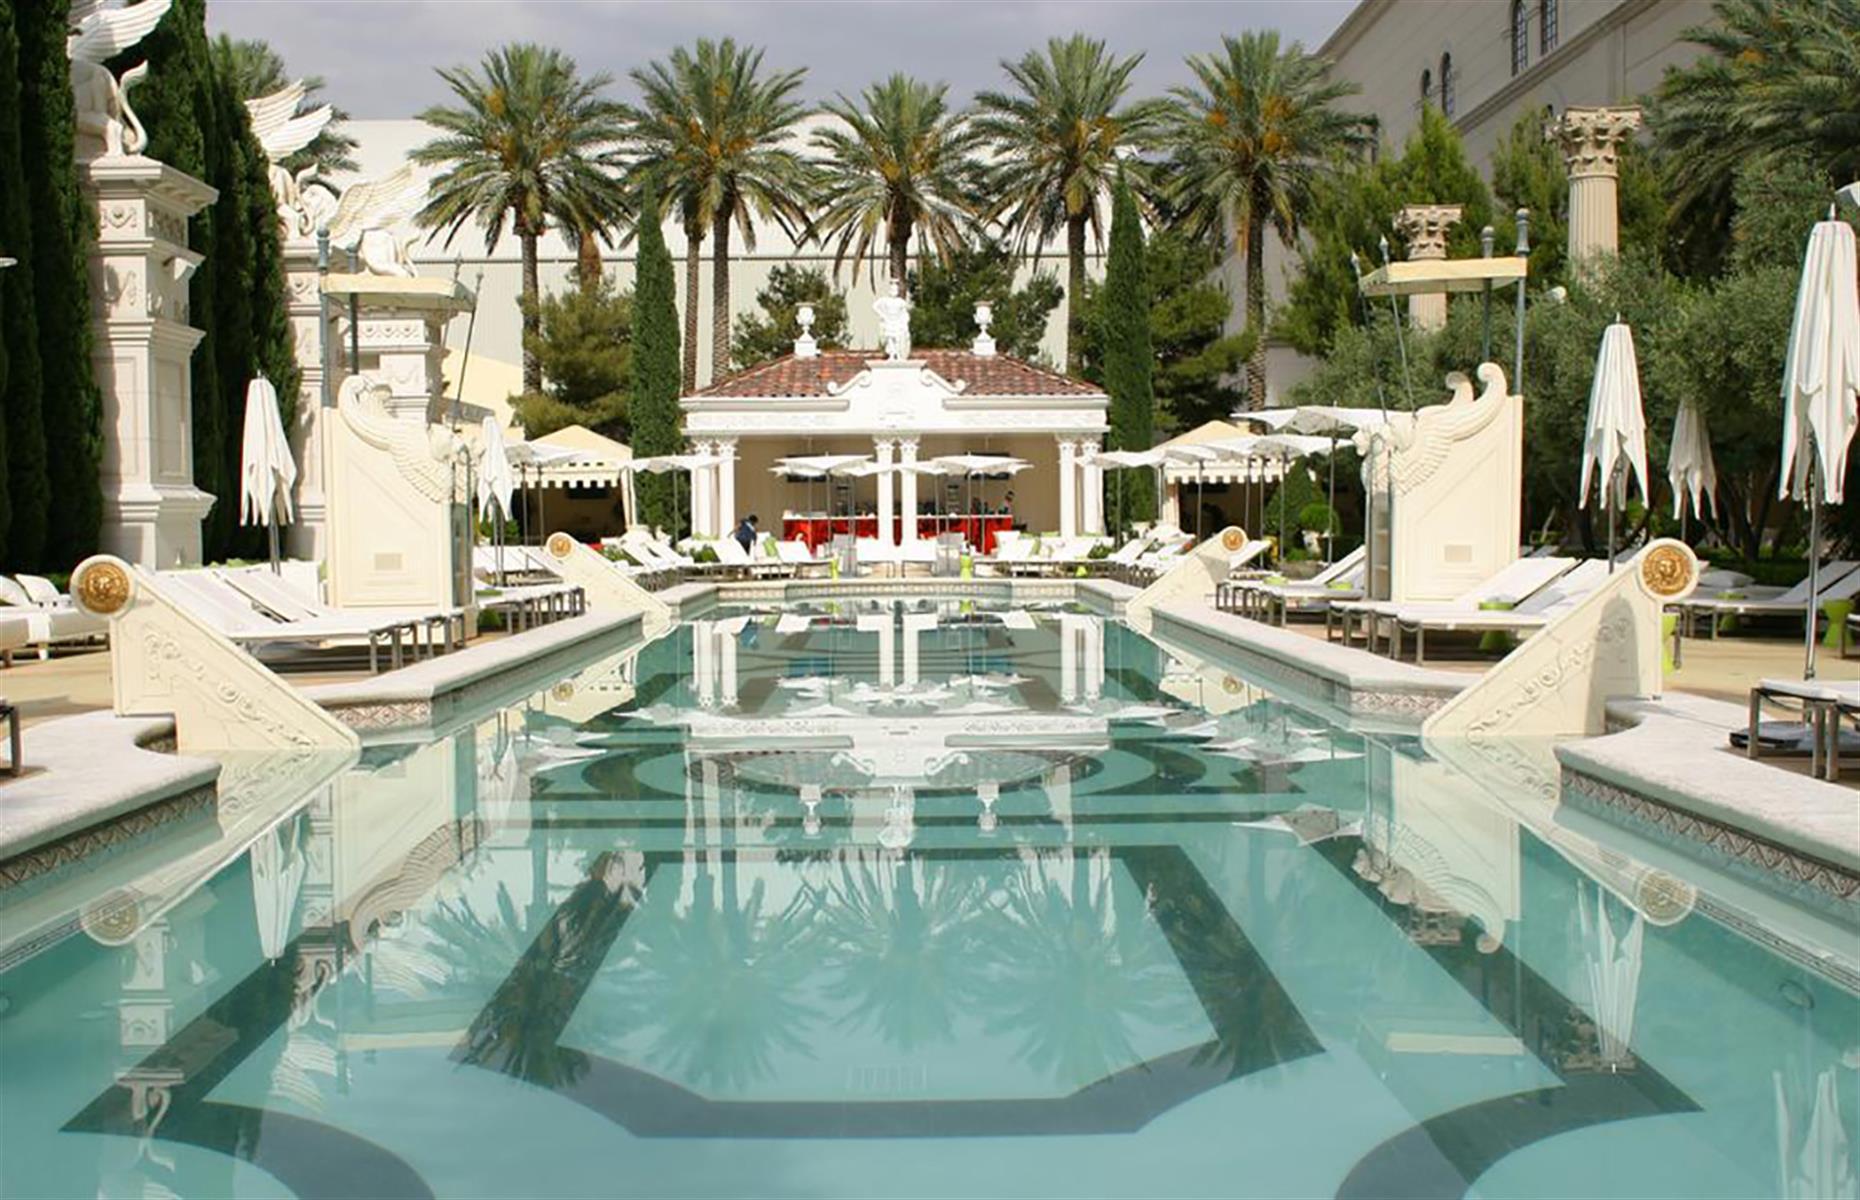 <p>Step back in time and enjoy the luxuries of Ancient Rome at the <a href="https://www.booking.com/hotel/us/harrah-s-caesars-palace.en-gb.html" rel="nofollow” target=">Caesars Palace Hotel & Casino</a> in Las Vegas. Lavish marble interiors, statues and fountains are all reminiscent of the great empire, while unique spa experiences, like a Roman bath hydrotherapy circuit, offer a glimpse into what could've been the lives of the upper-class Romans. </p>